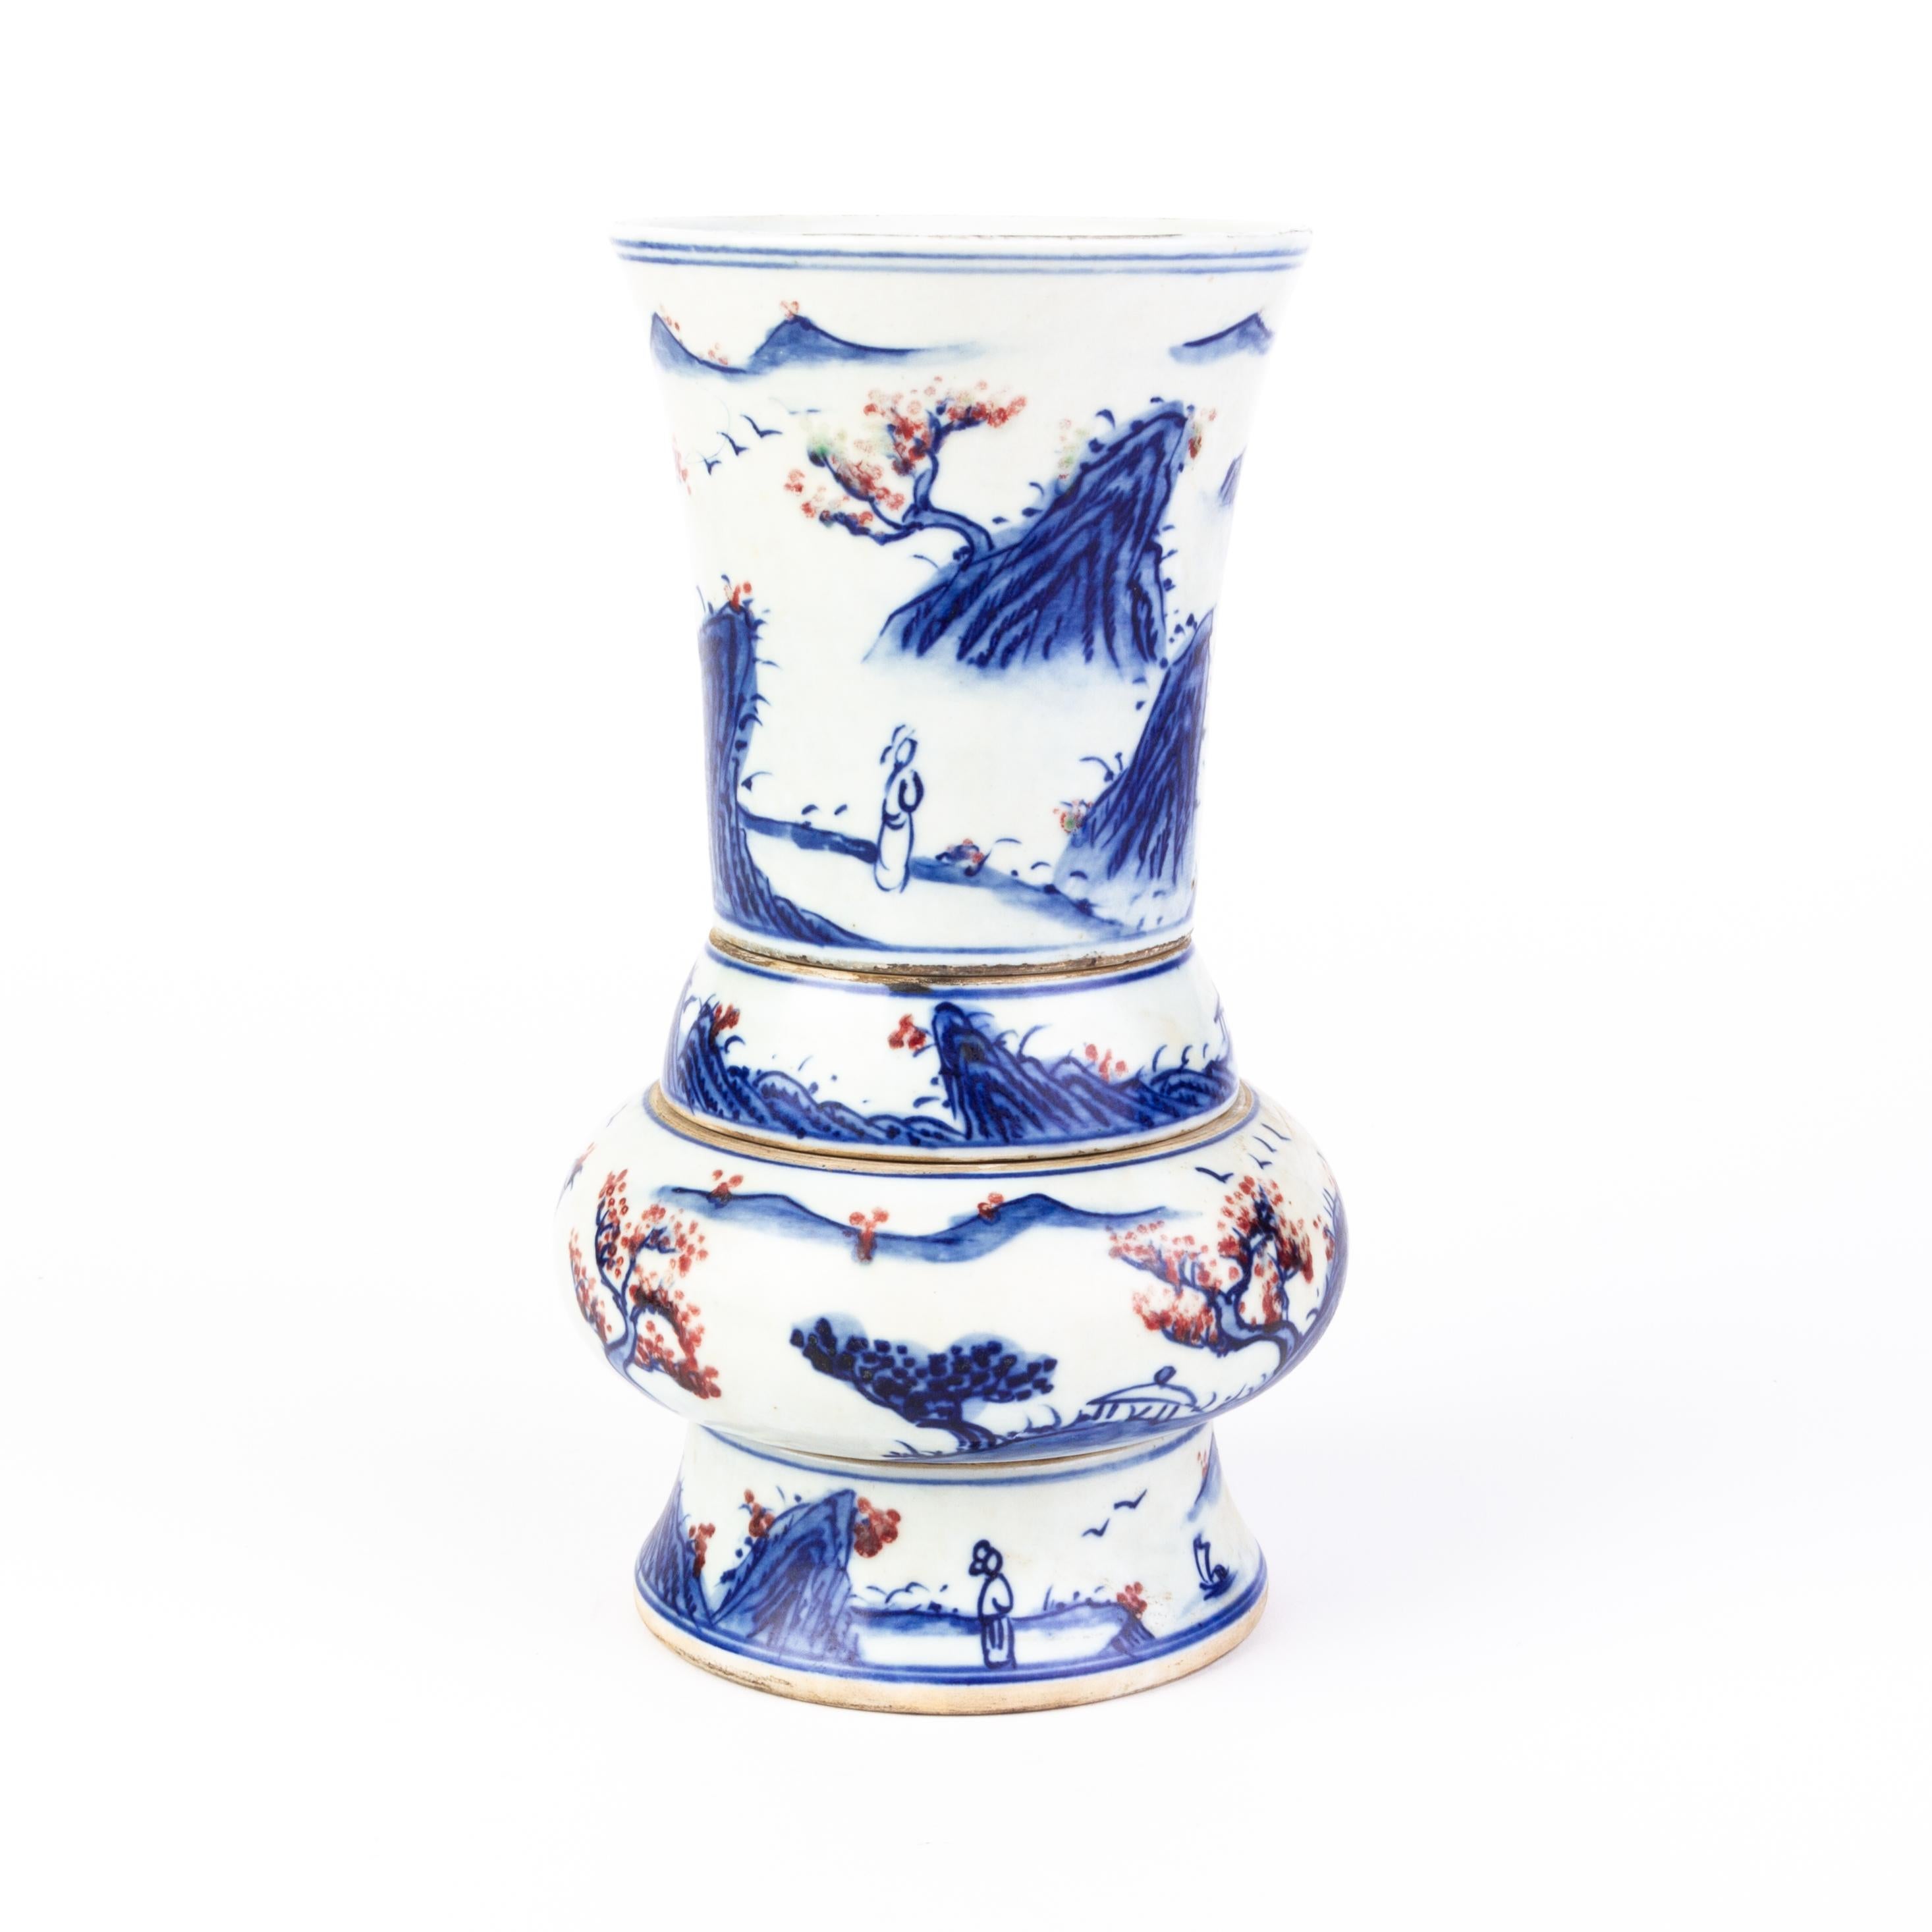 Chinese Blue & White Porcelain Gu Vase 19th Century with seal mark on base.
From a private collection.
Free international shipping. 